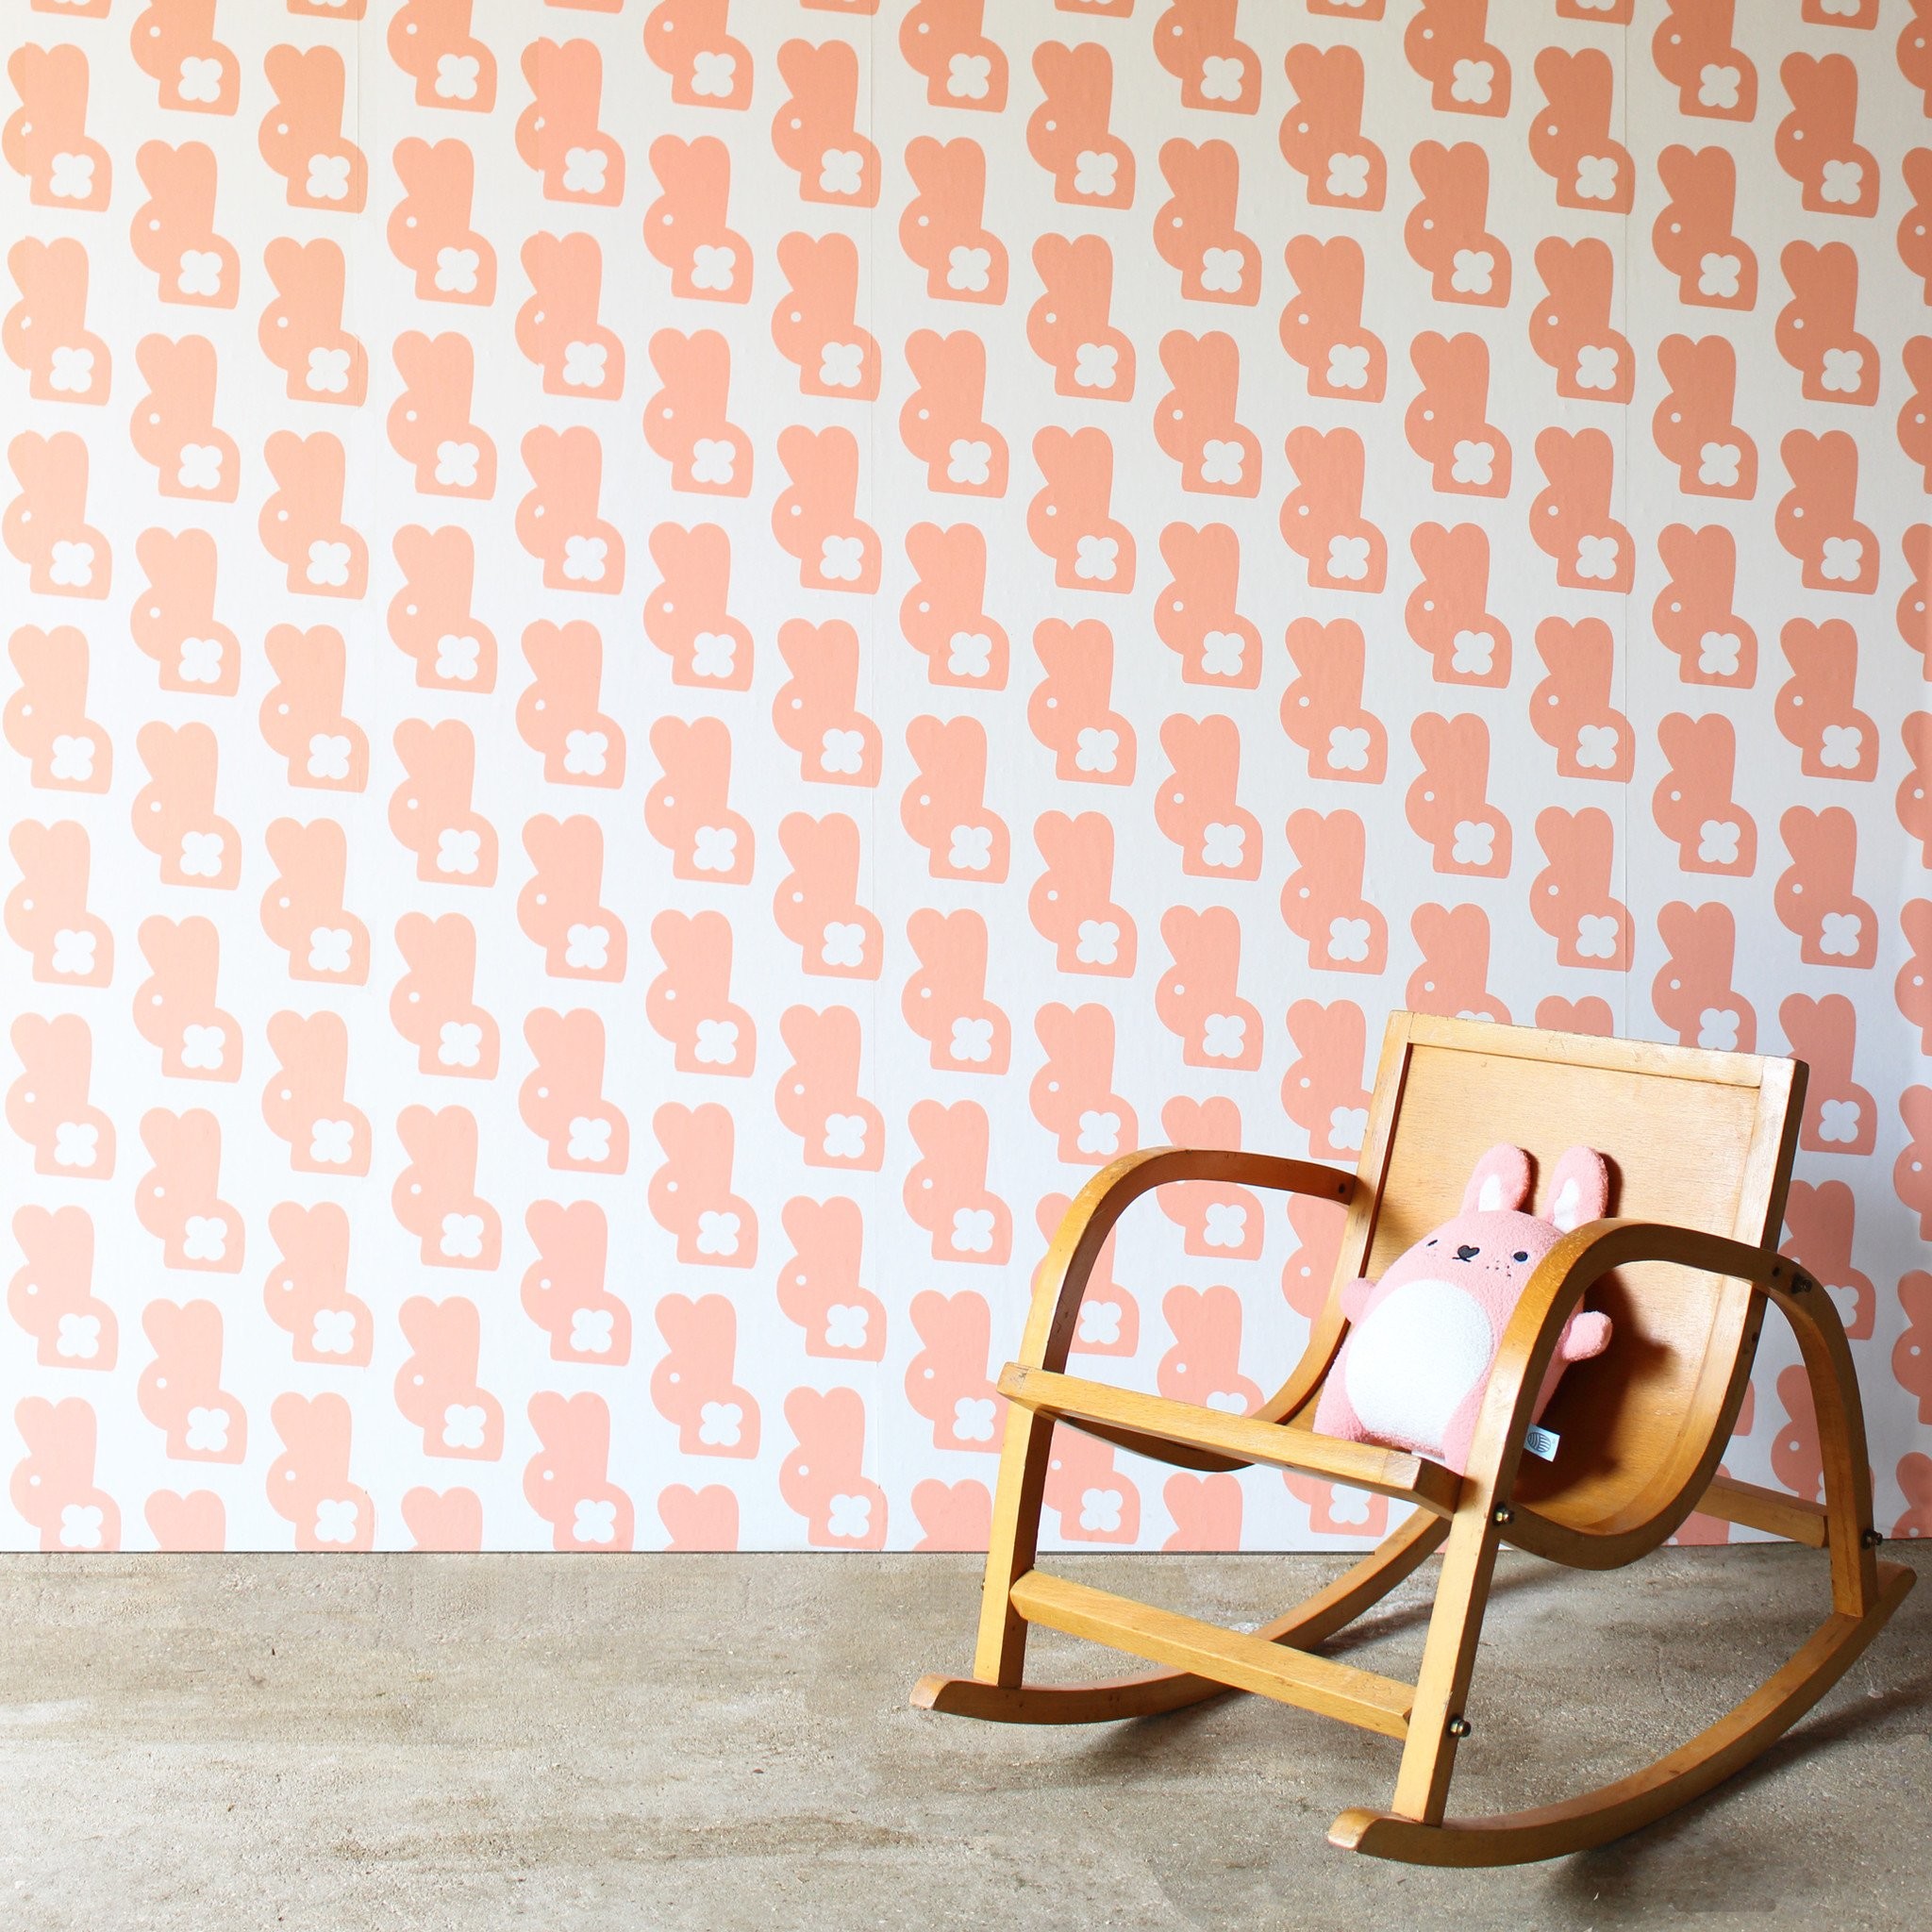 2048x2048 Cute pink bunny wallpaper perfect for creating a modern scandi style  nursery or kids room.